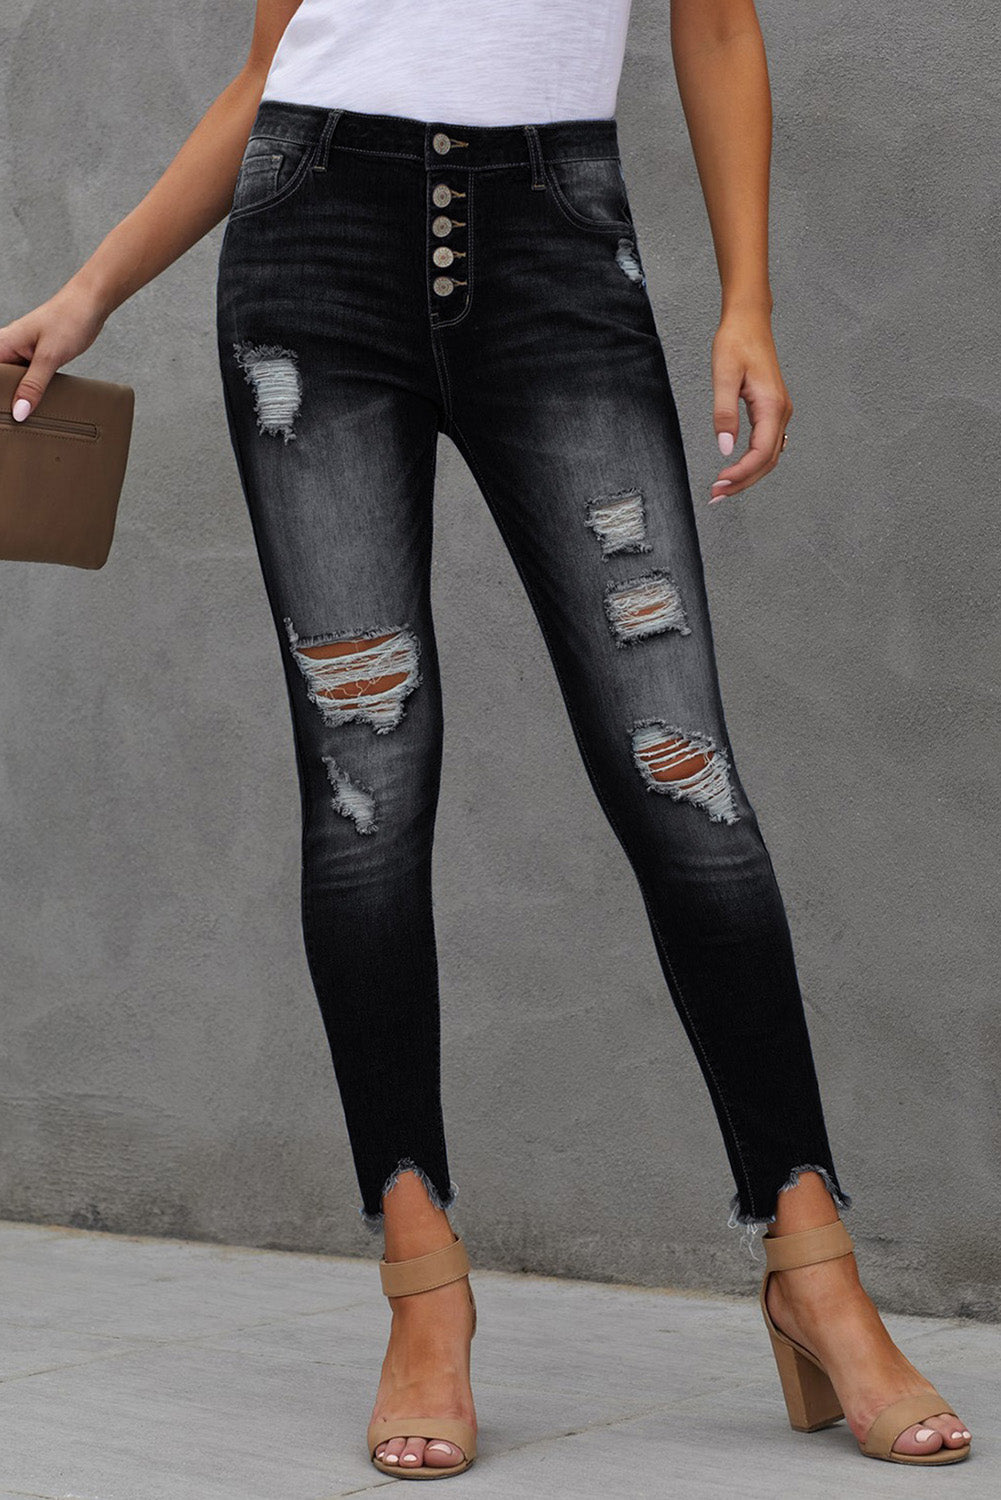  Ankle-Length Skinny Jeans